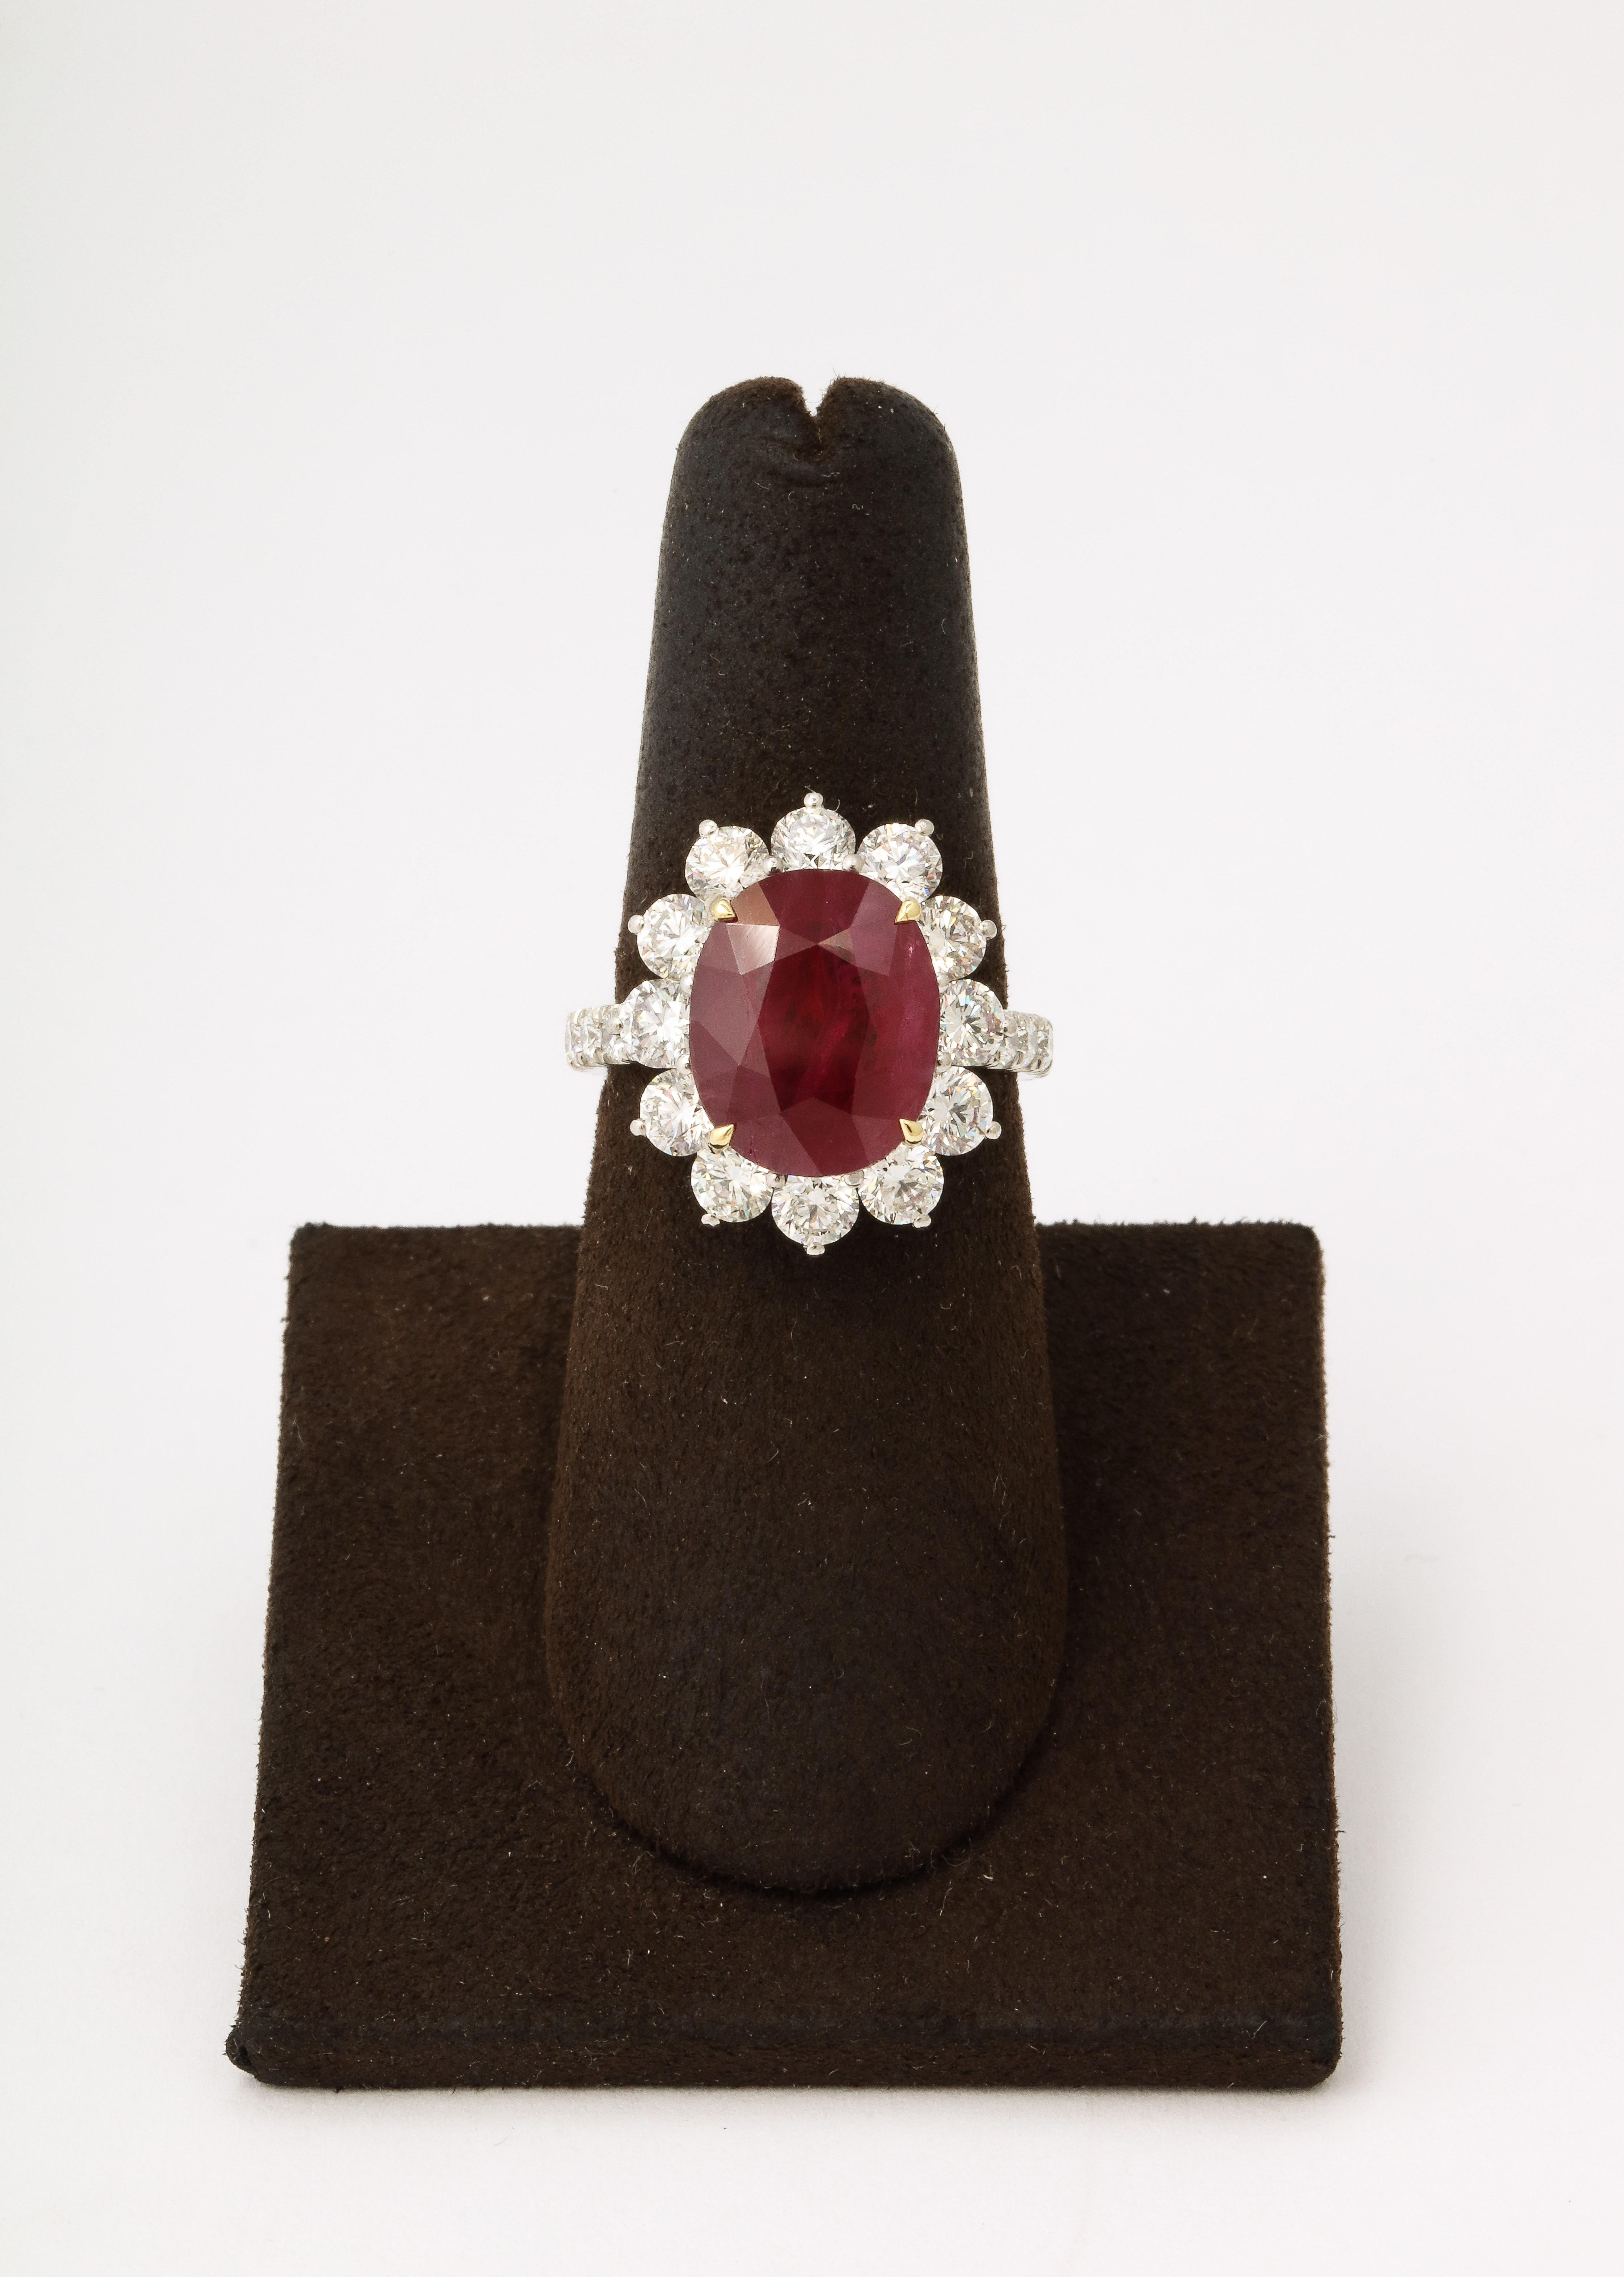 
A Fabulous Ruby and rare find! 

6.15 carat certified Burma Ruby with Fine color and Luster. 

2.32 carats of white round brilliant cut diamonds. 

Set in platinum 

Currently a size 6.5, this ring can easily be resized. 

Certified by Christian